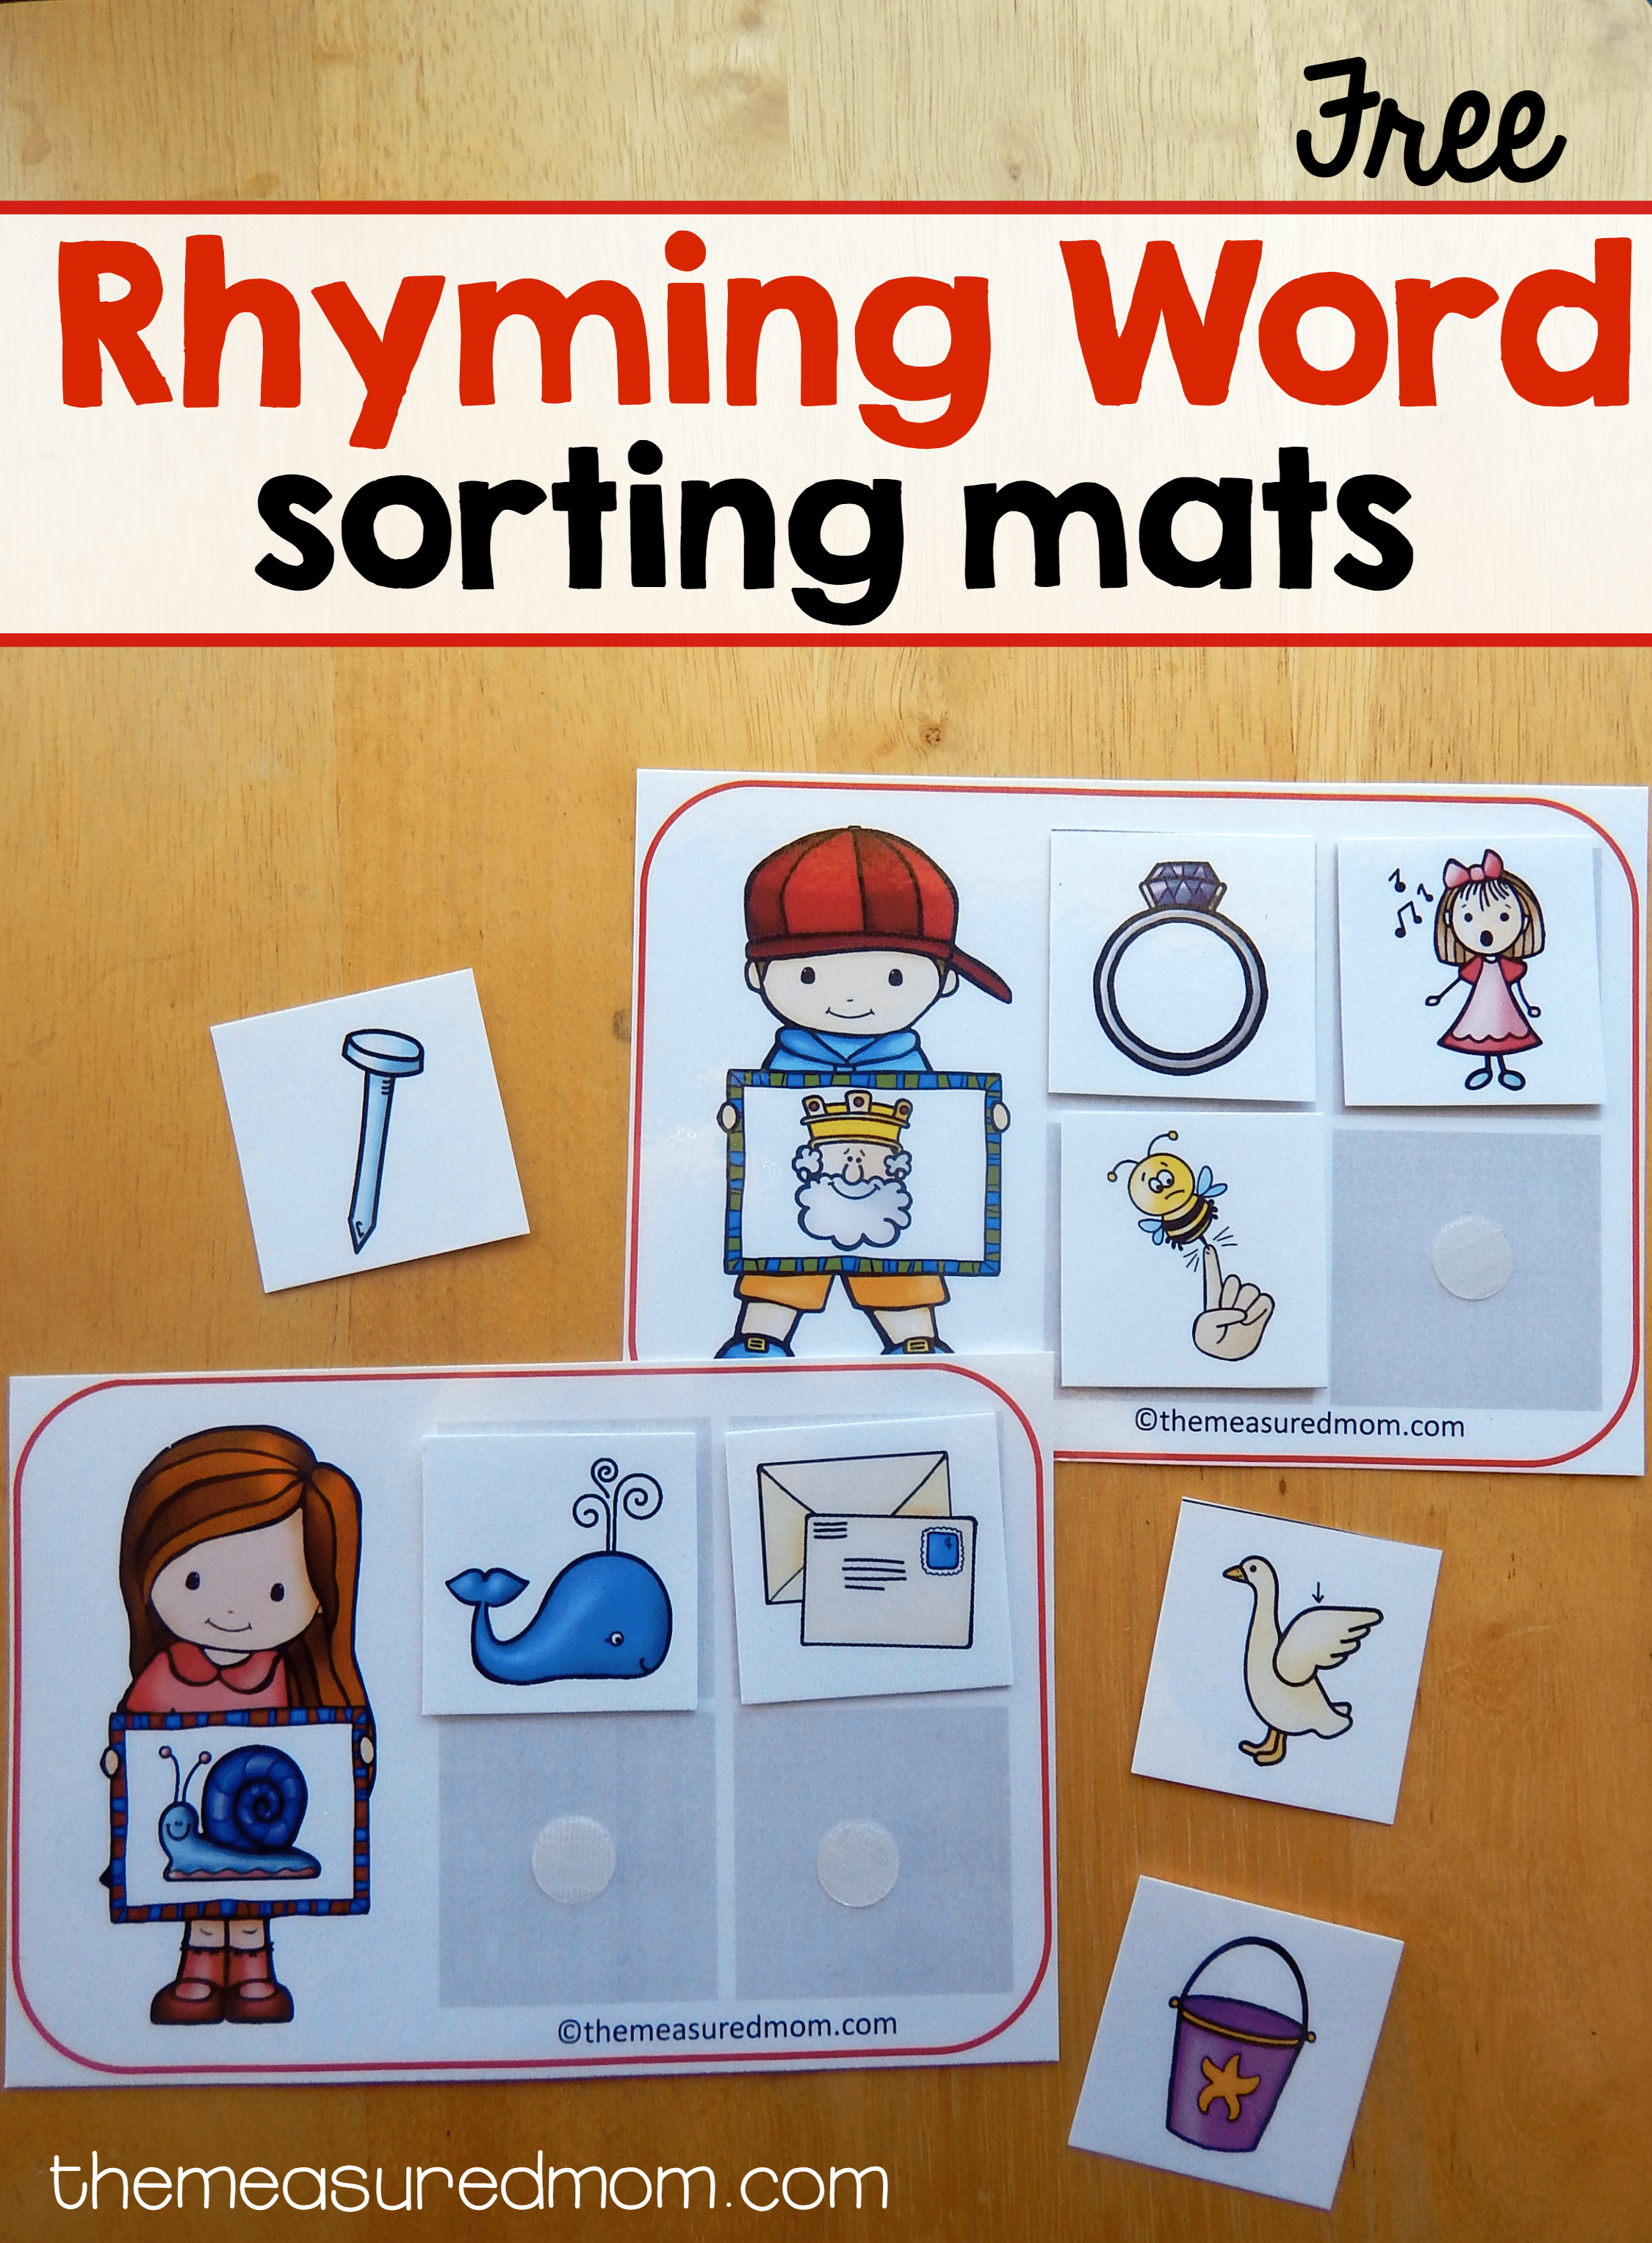 14-free-sorting-mats-for-rhyming-words-the-measured-mom